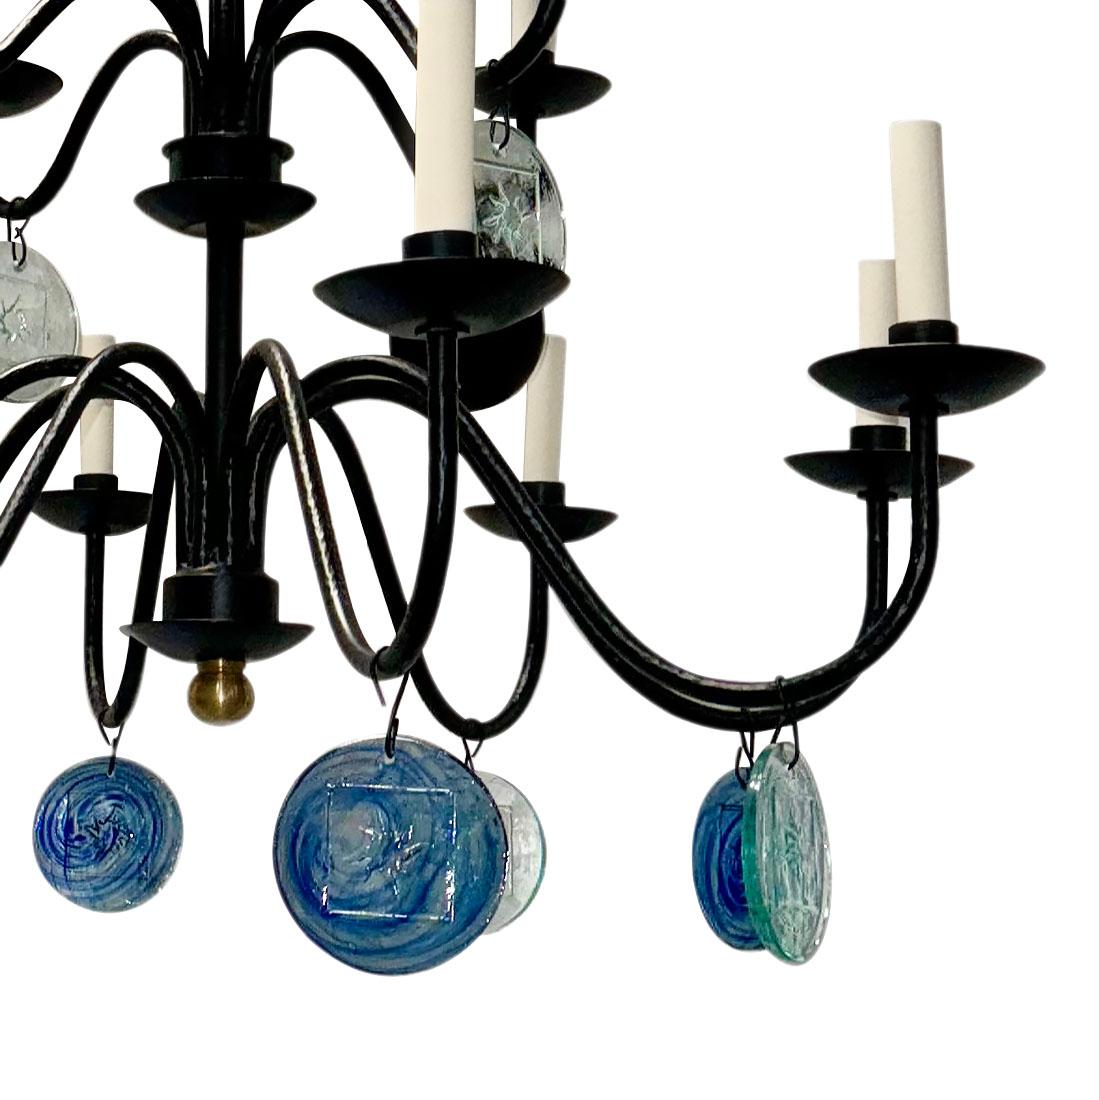 A circa 1970's Swedish iron chandelier with glass pendants and 16 lights.

Measurements:
Drop: 39